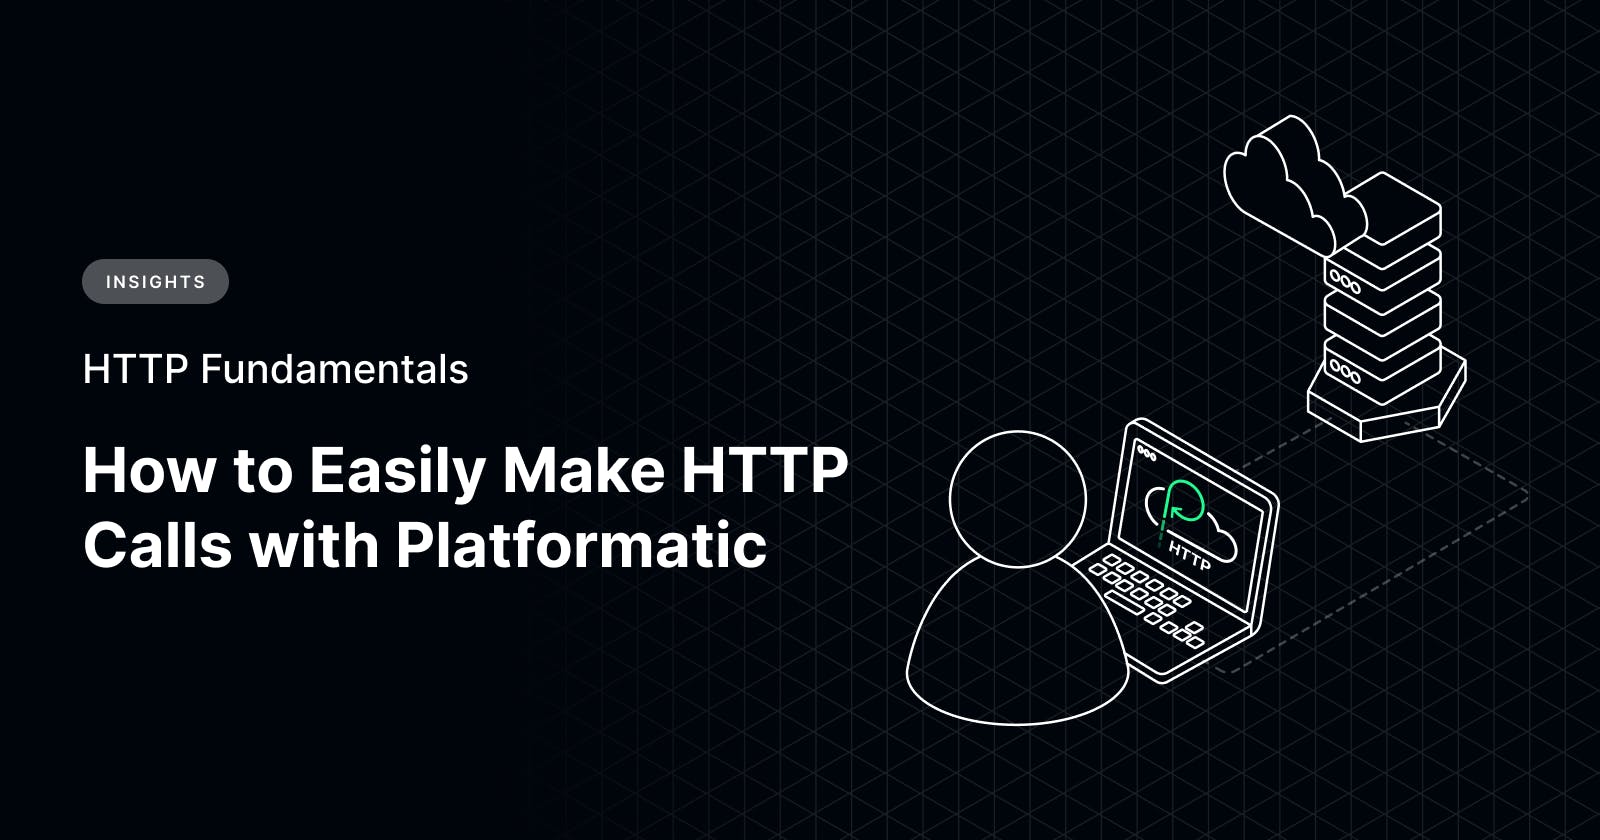 HTTP Fundamentals: How to Easily Make HTTP Calls with Platformatic